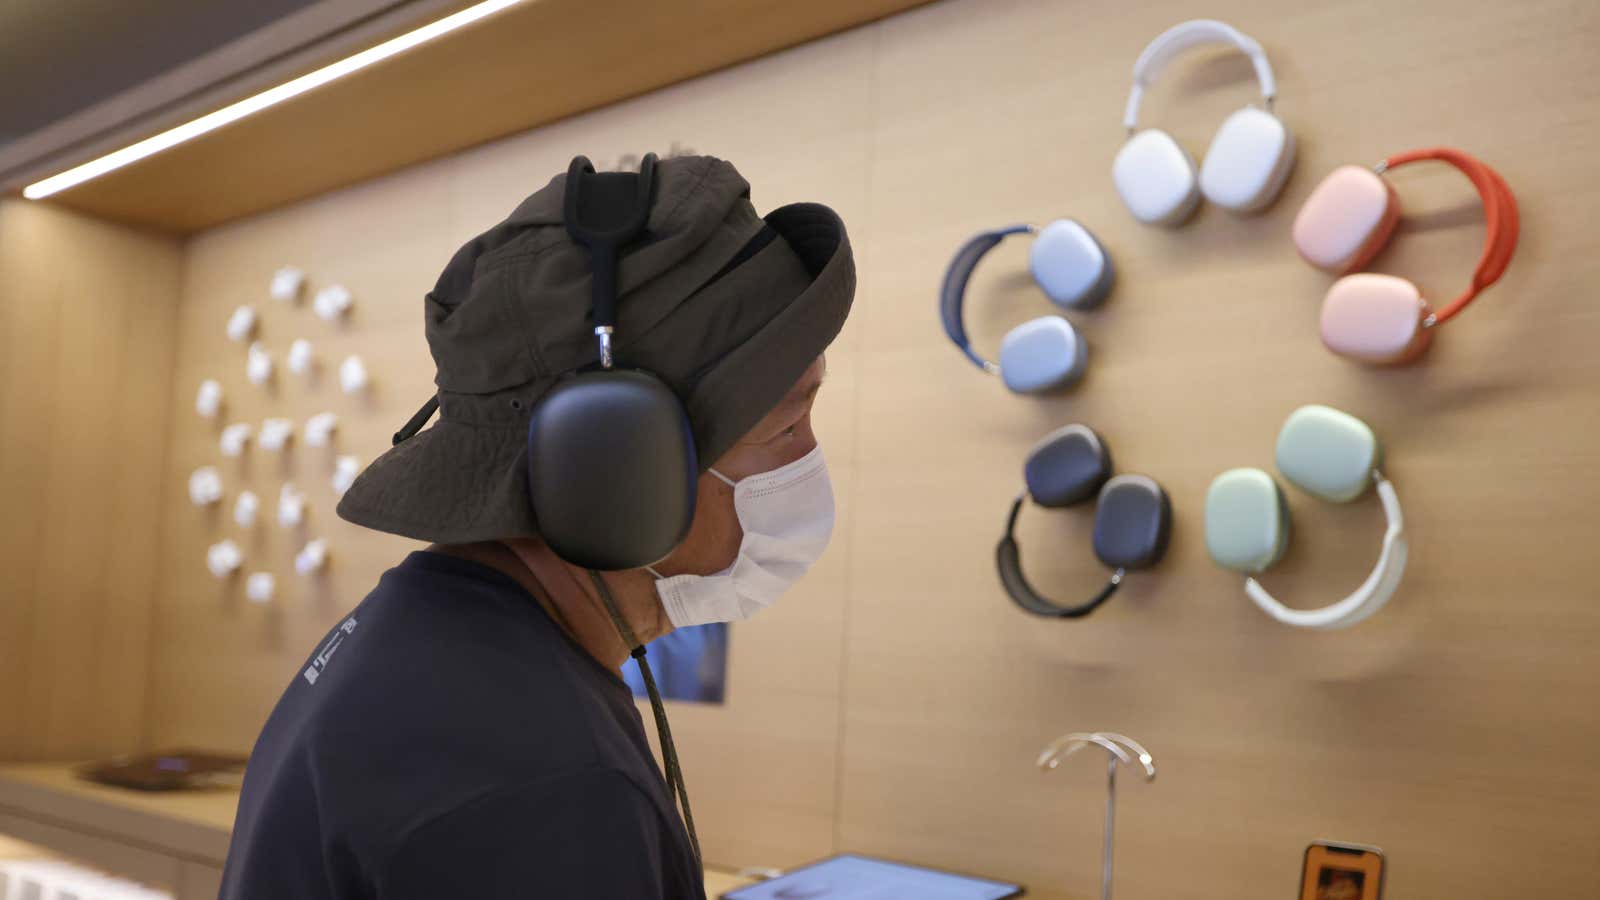 A customer samples headphones at an Apple Store in Los Angeles.